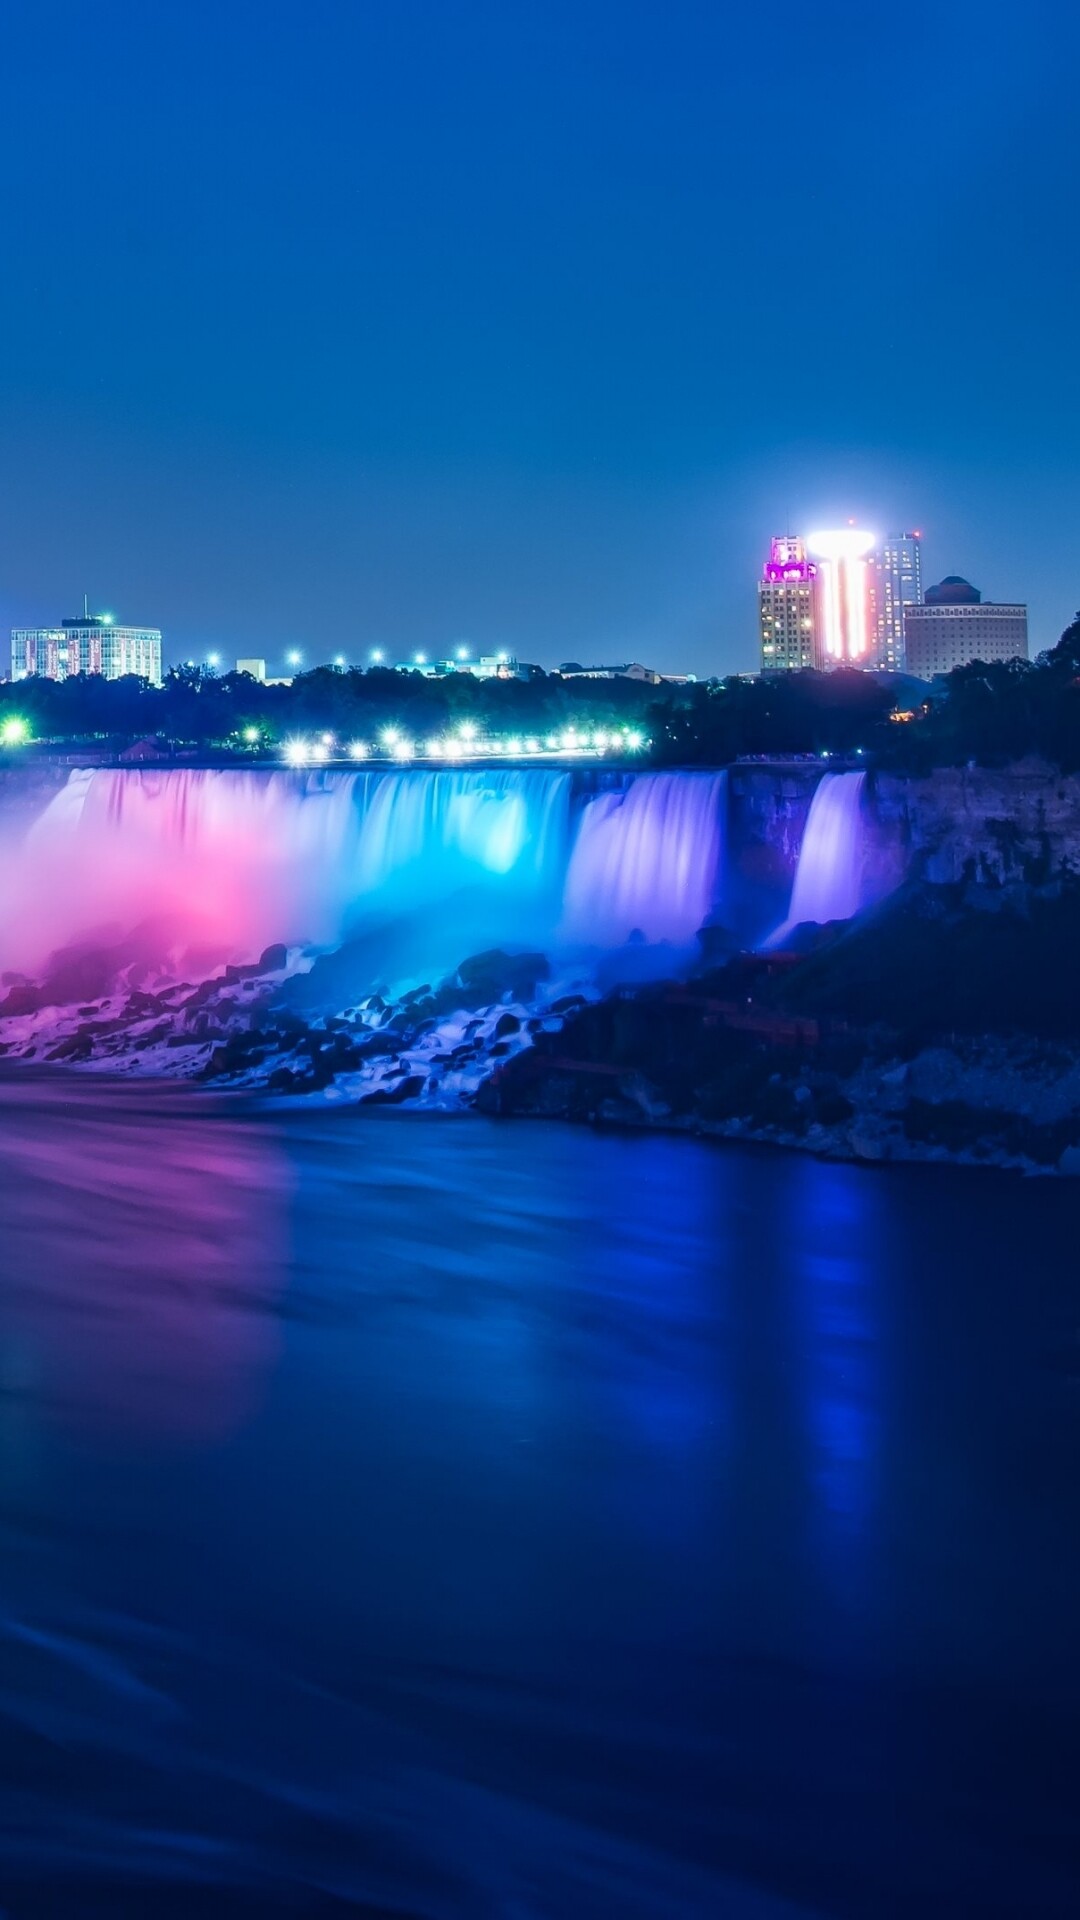 Niagara Falls: One of the greatest natural attractions in North America, The border between Ontario, Canada, and New York State. 1080x1920 Full HD Wallpaper.